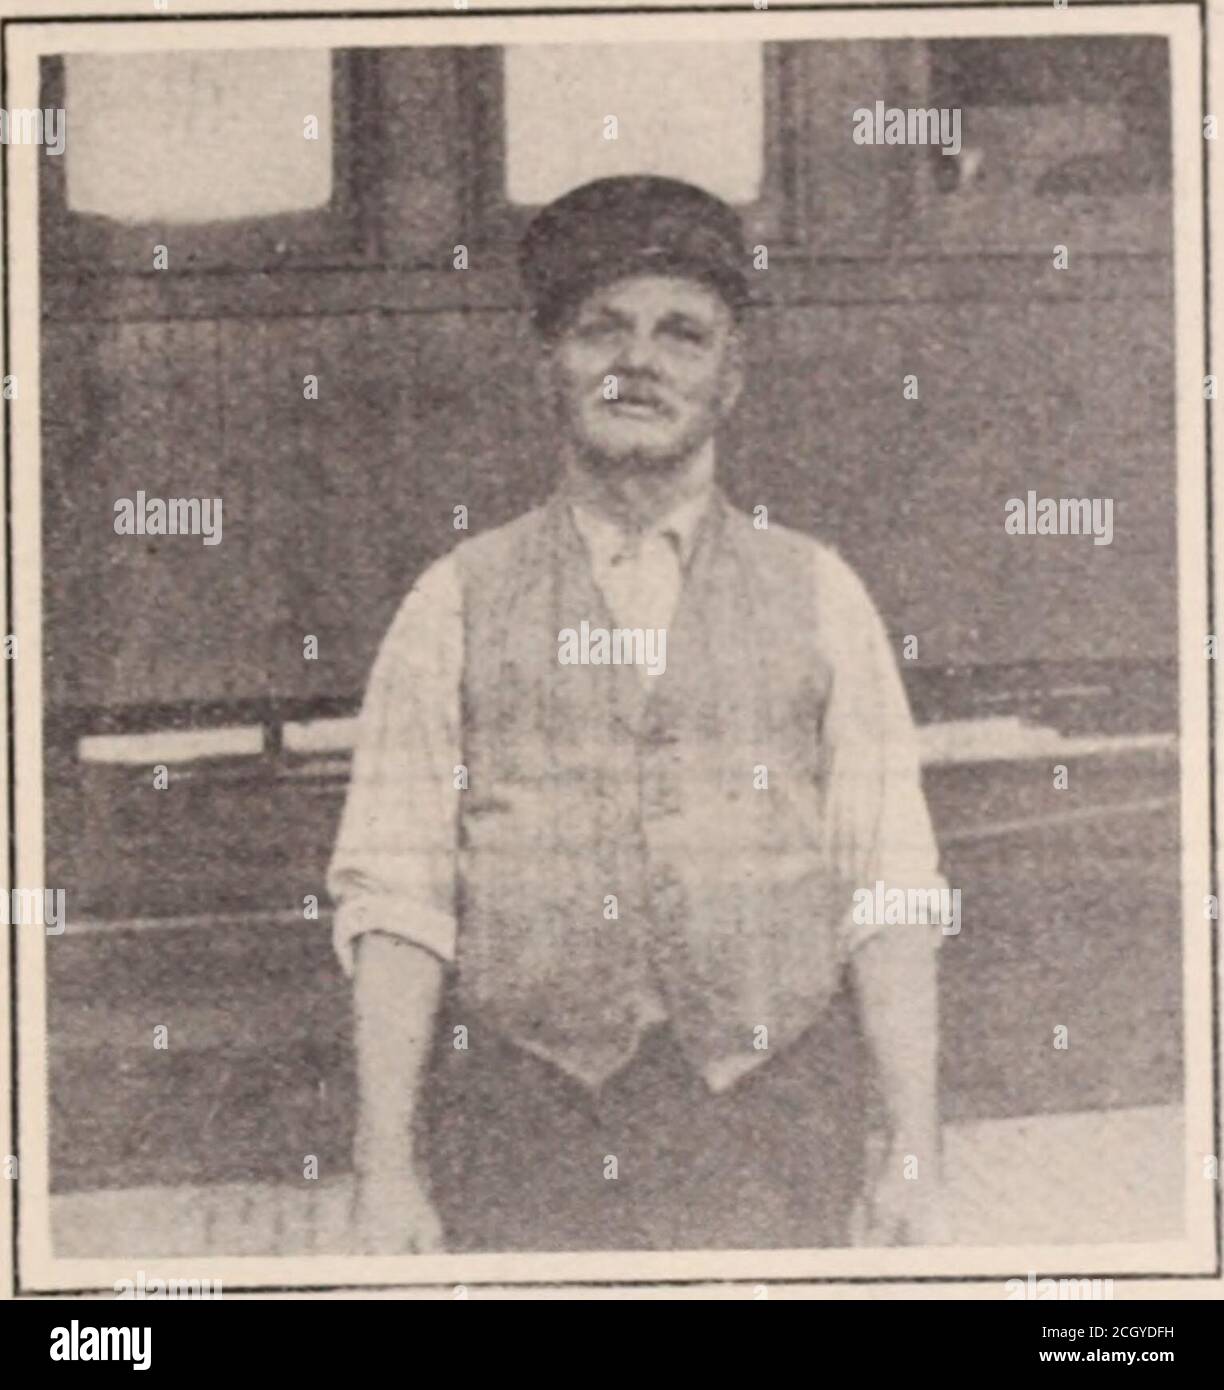 . Baltimore and Ohio employees magazine . HOUSE CREW, COLUMBUS YARD THE BALTIMORE AM) OIIK) l-MILo^ KS MACA/IM. 01. CHARLES A. TONEY The accompanying picture is of Chas. A.Toney, at present employed as janitor at theNewark passenger station. Mr. Toney was born in Cincinnati, March 1st,1850, and entered the service of the lialtimore &Ohio Railroad Company September 5th, 1874,as private car porter with W. C. Quincy, generalmanager lines west of the Ohio Rivef, and wassuccessively with general managers C. H. Hut-son, Bradford Dunhan, Captain V. W. Peabody,and later with general superintendent J. Stock Photo